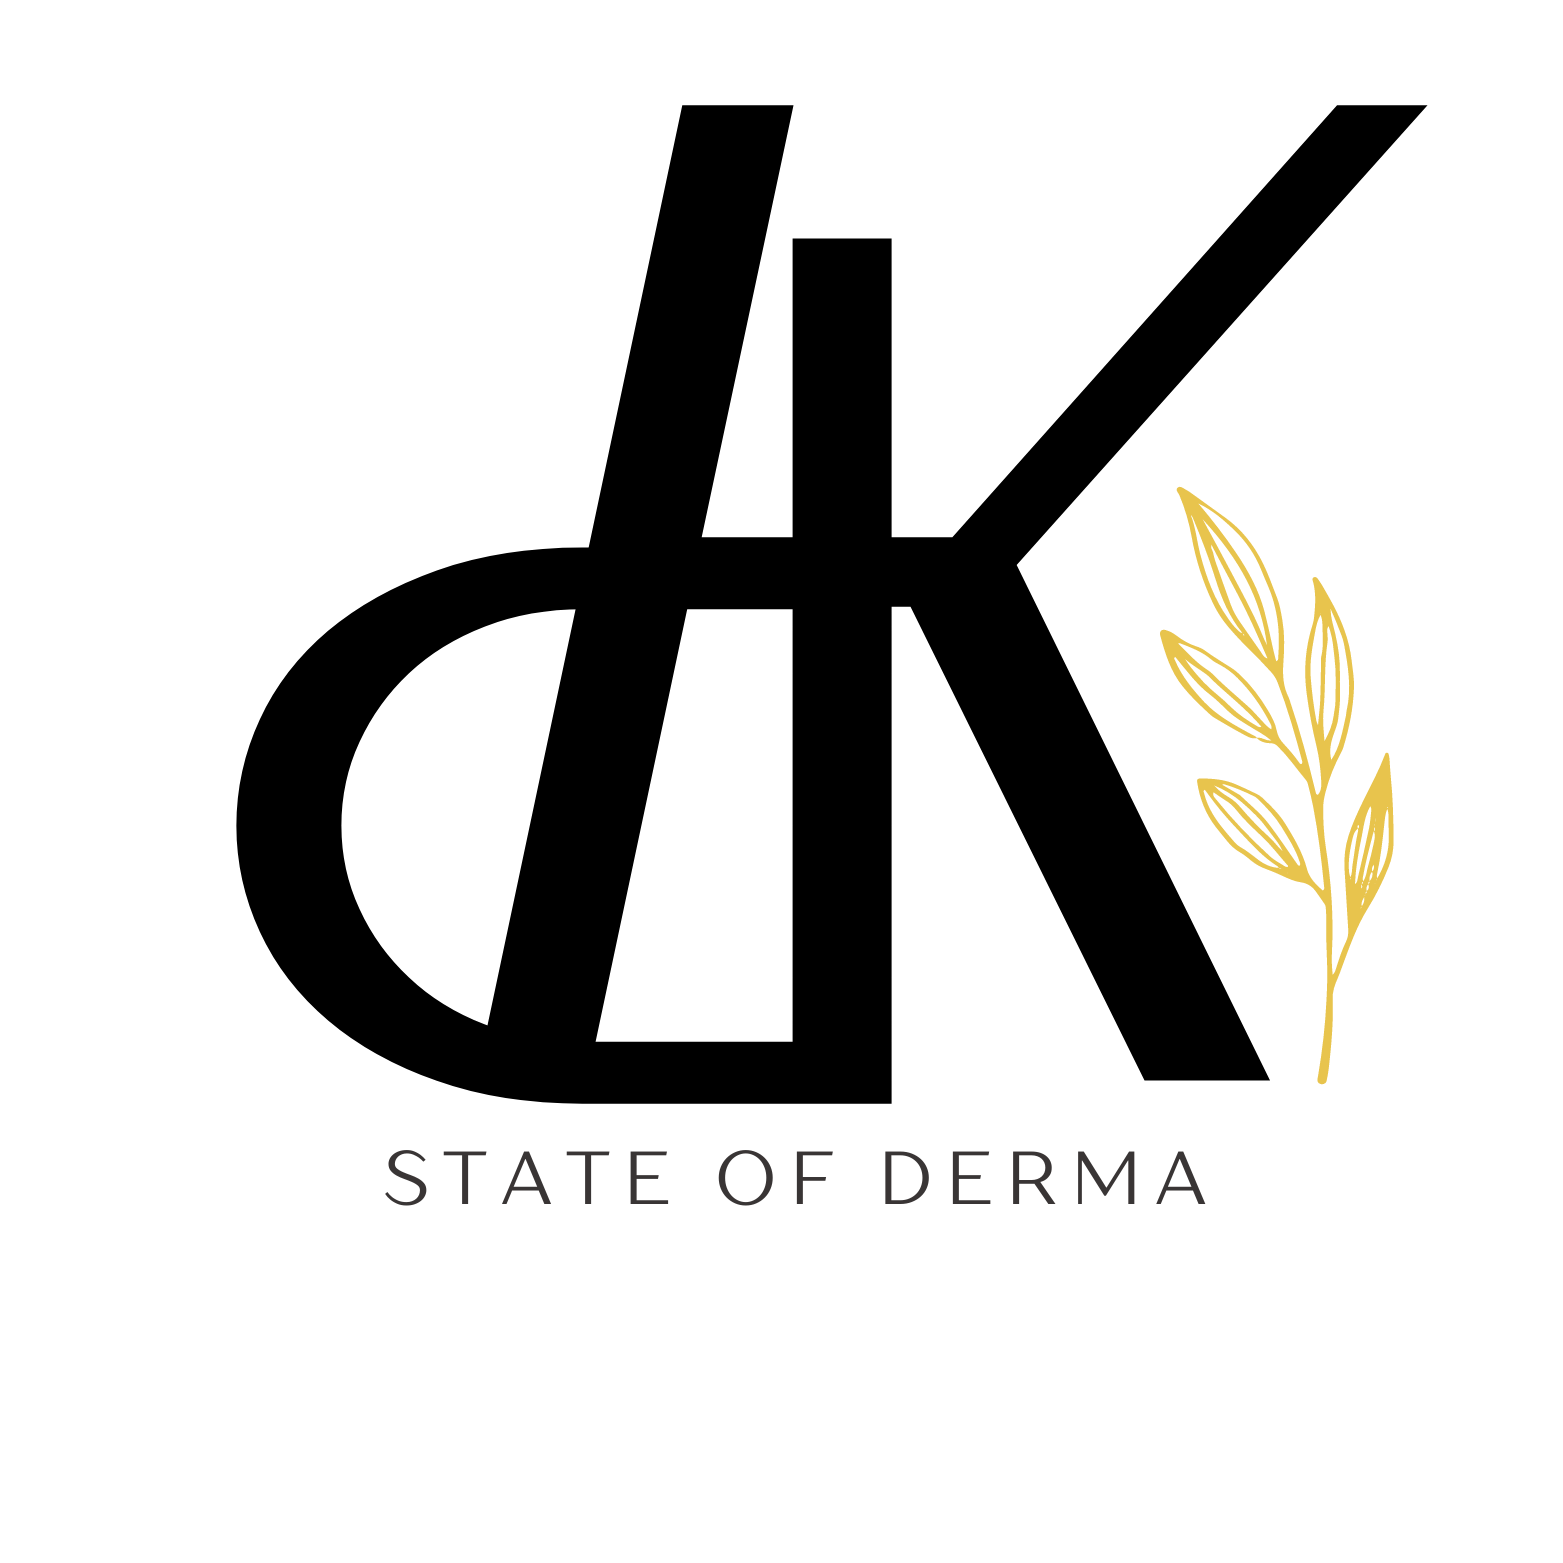 State of Derma